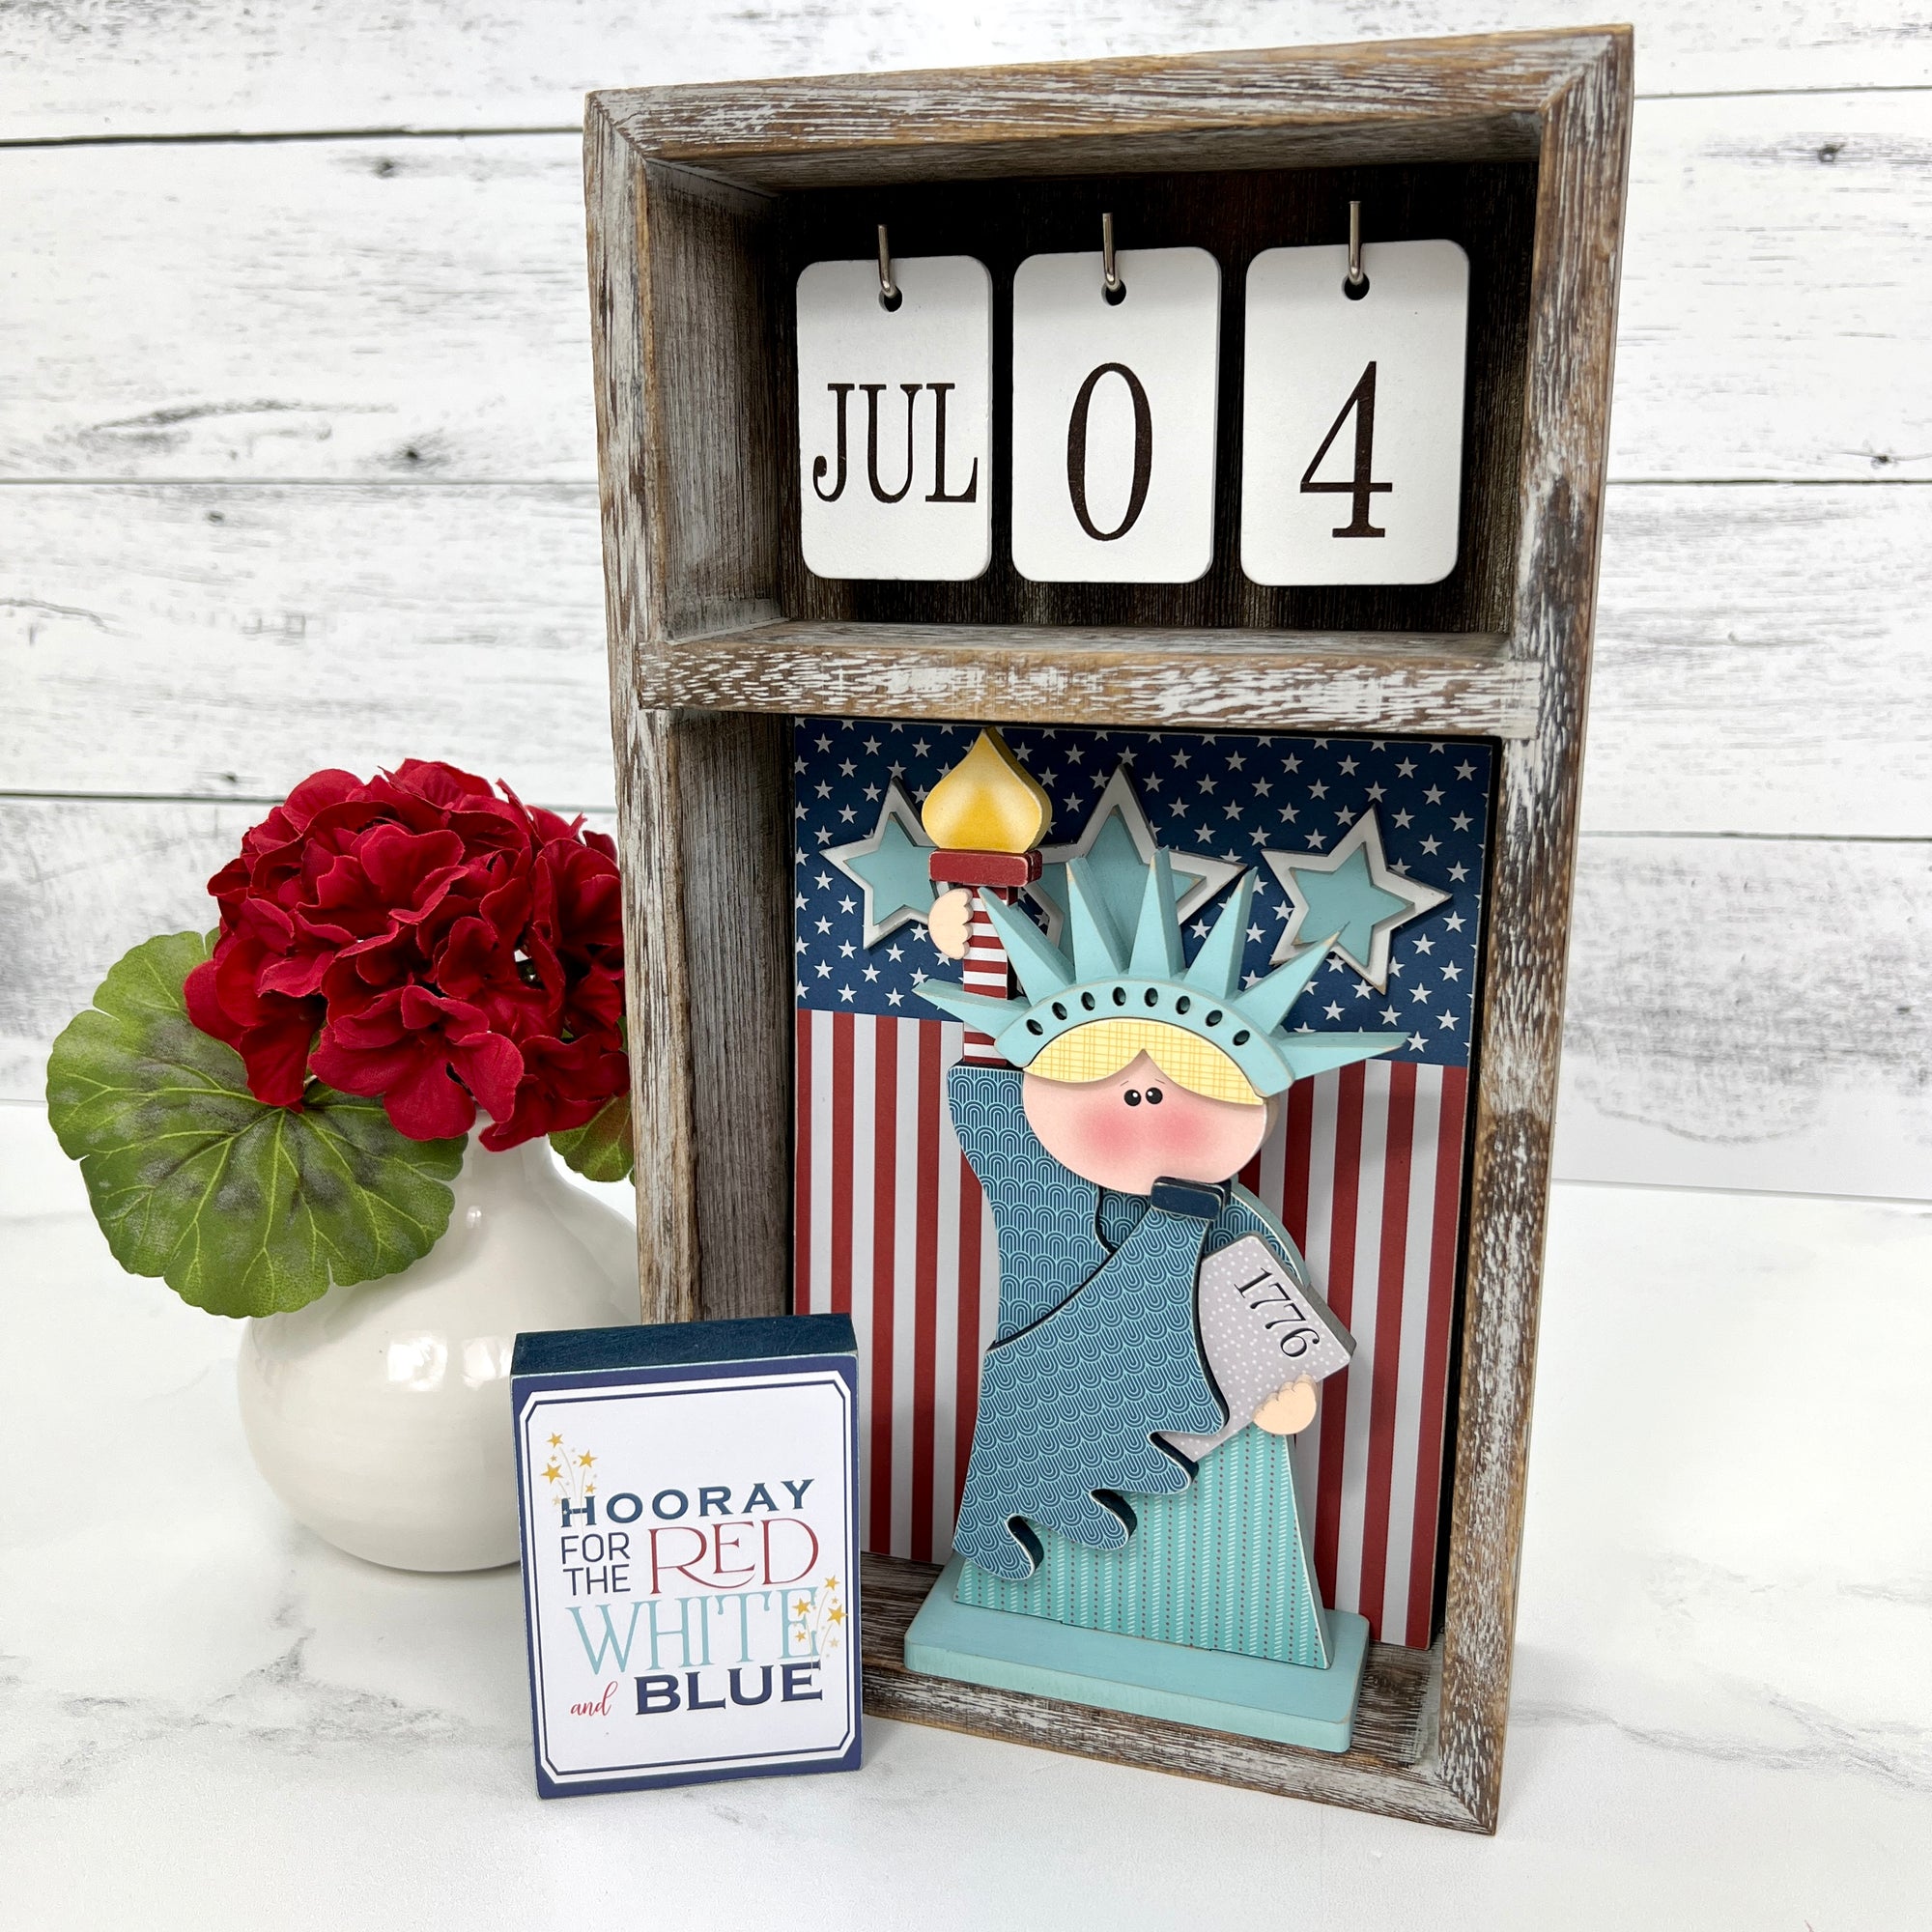 Seasonal calendar box with patriotic and 4th of july wood decorations; statue of liberty